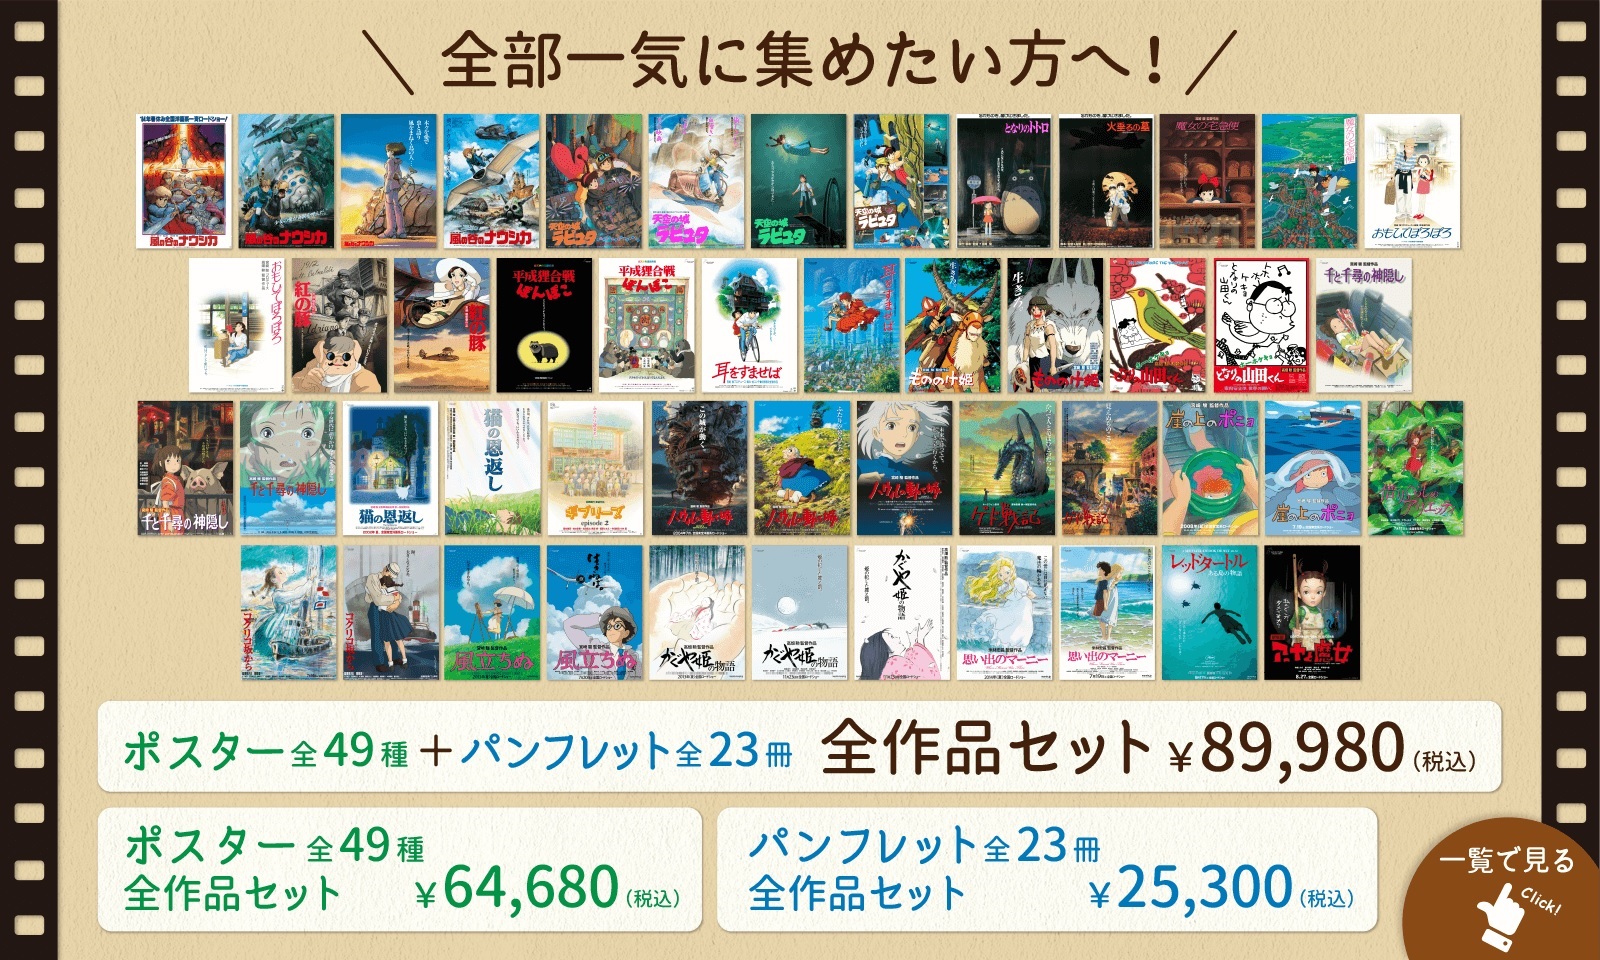 Studio Ghibli offering reprints of posters from all its anime